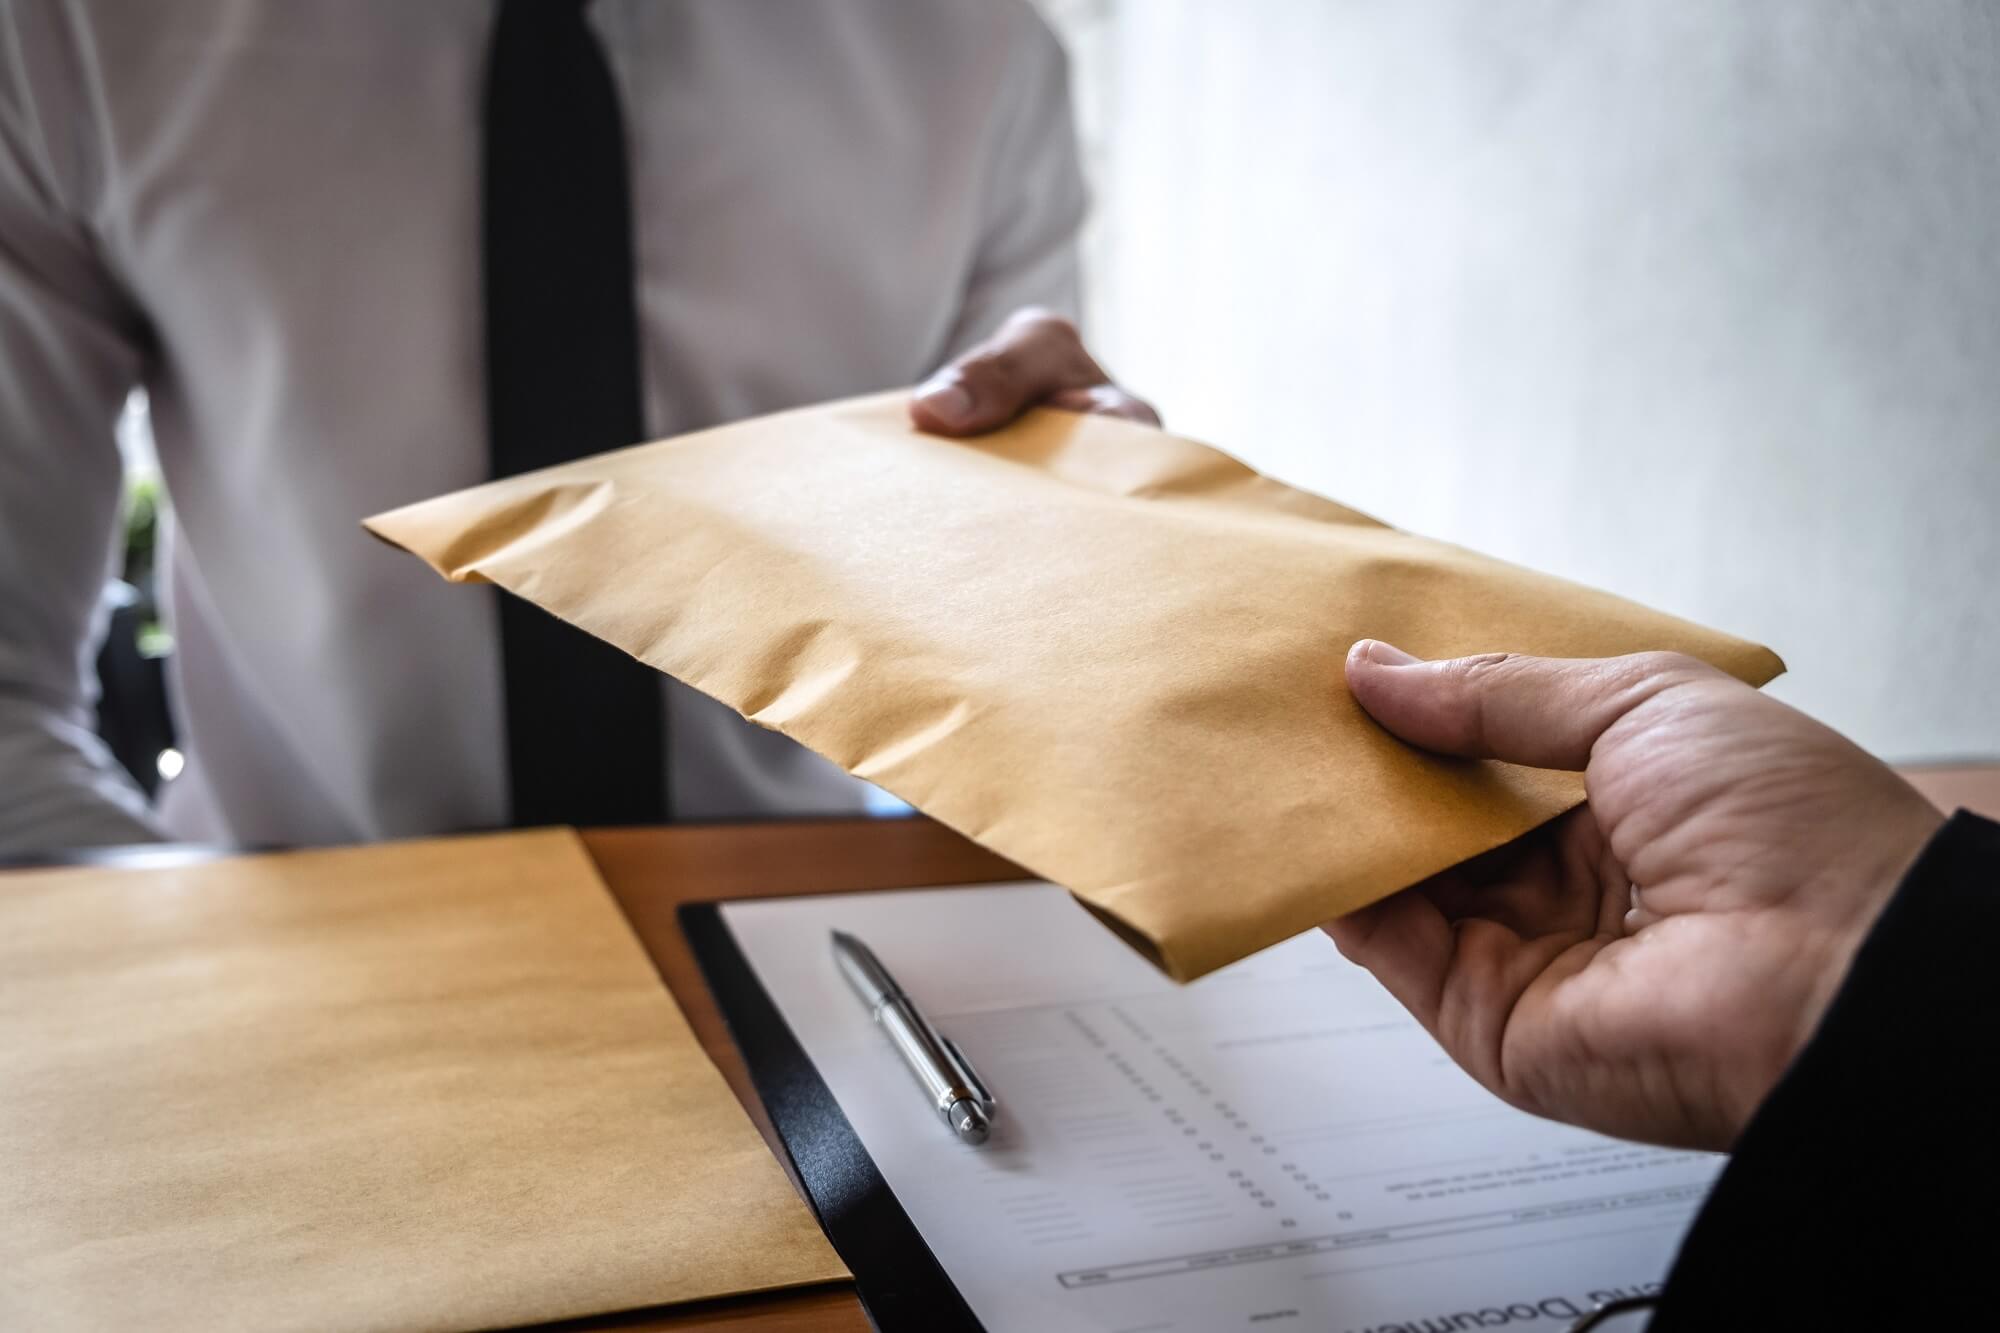 The husband is served with a package of divorce documents from his wife